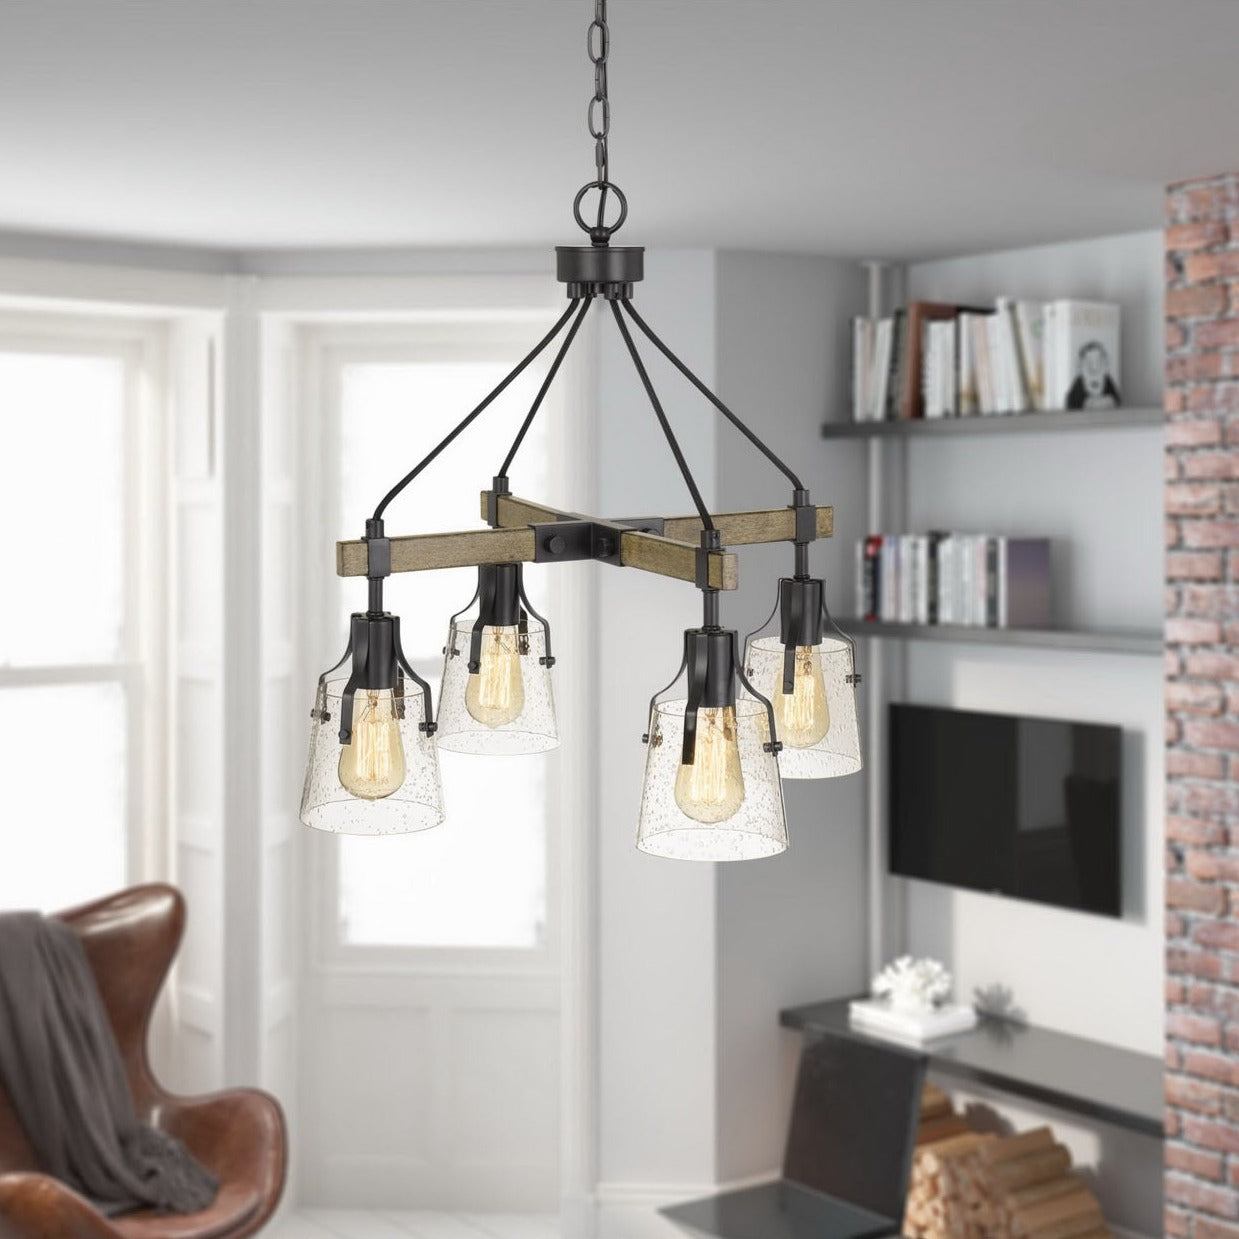 Cal Lighting 60W X 4 Aosta Metal Chandelier With Bubbled Glass Shades (Edison Bulbs Are Not Included) 